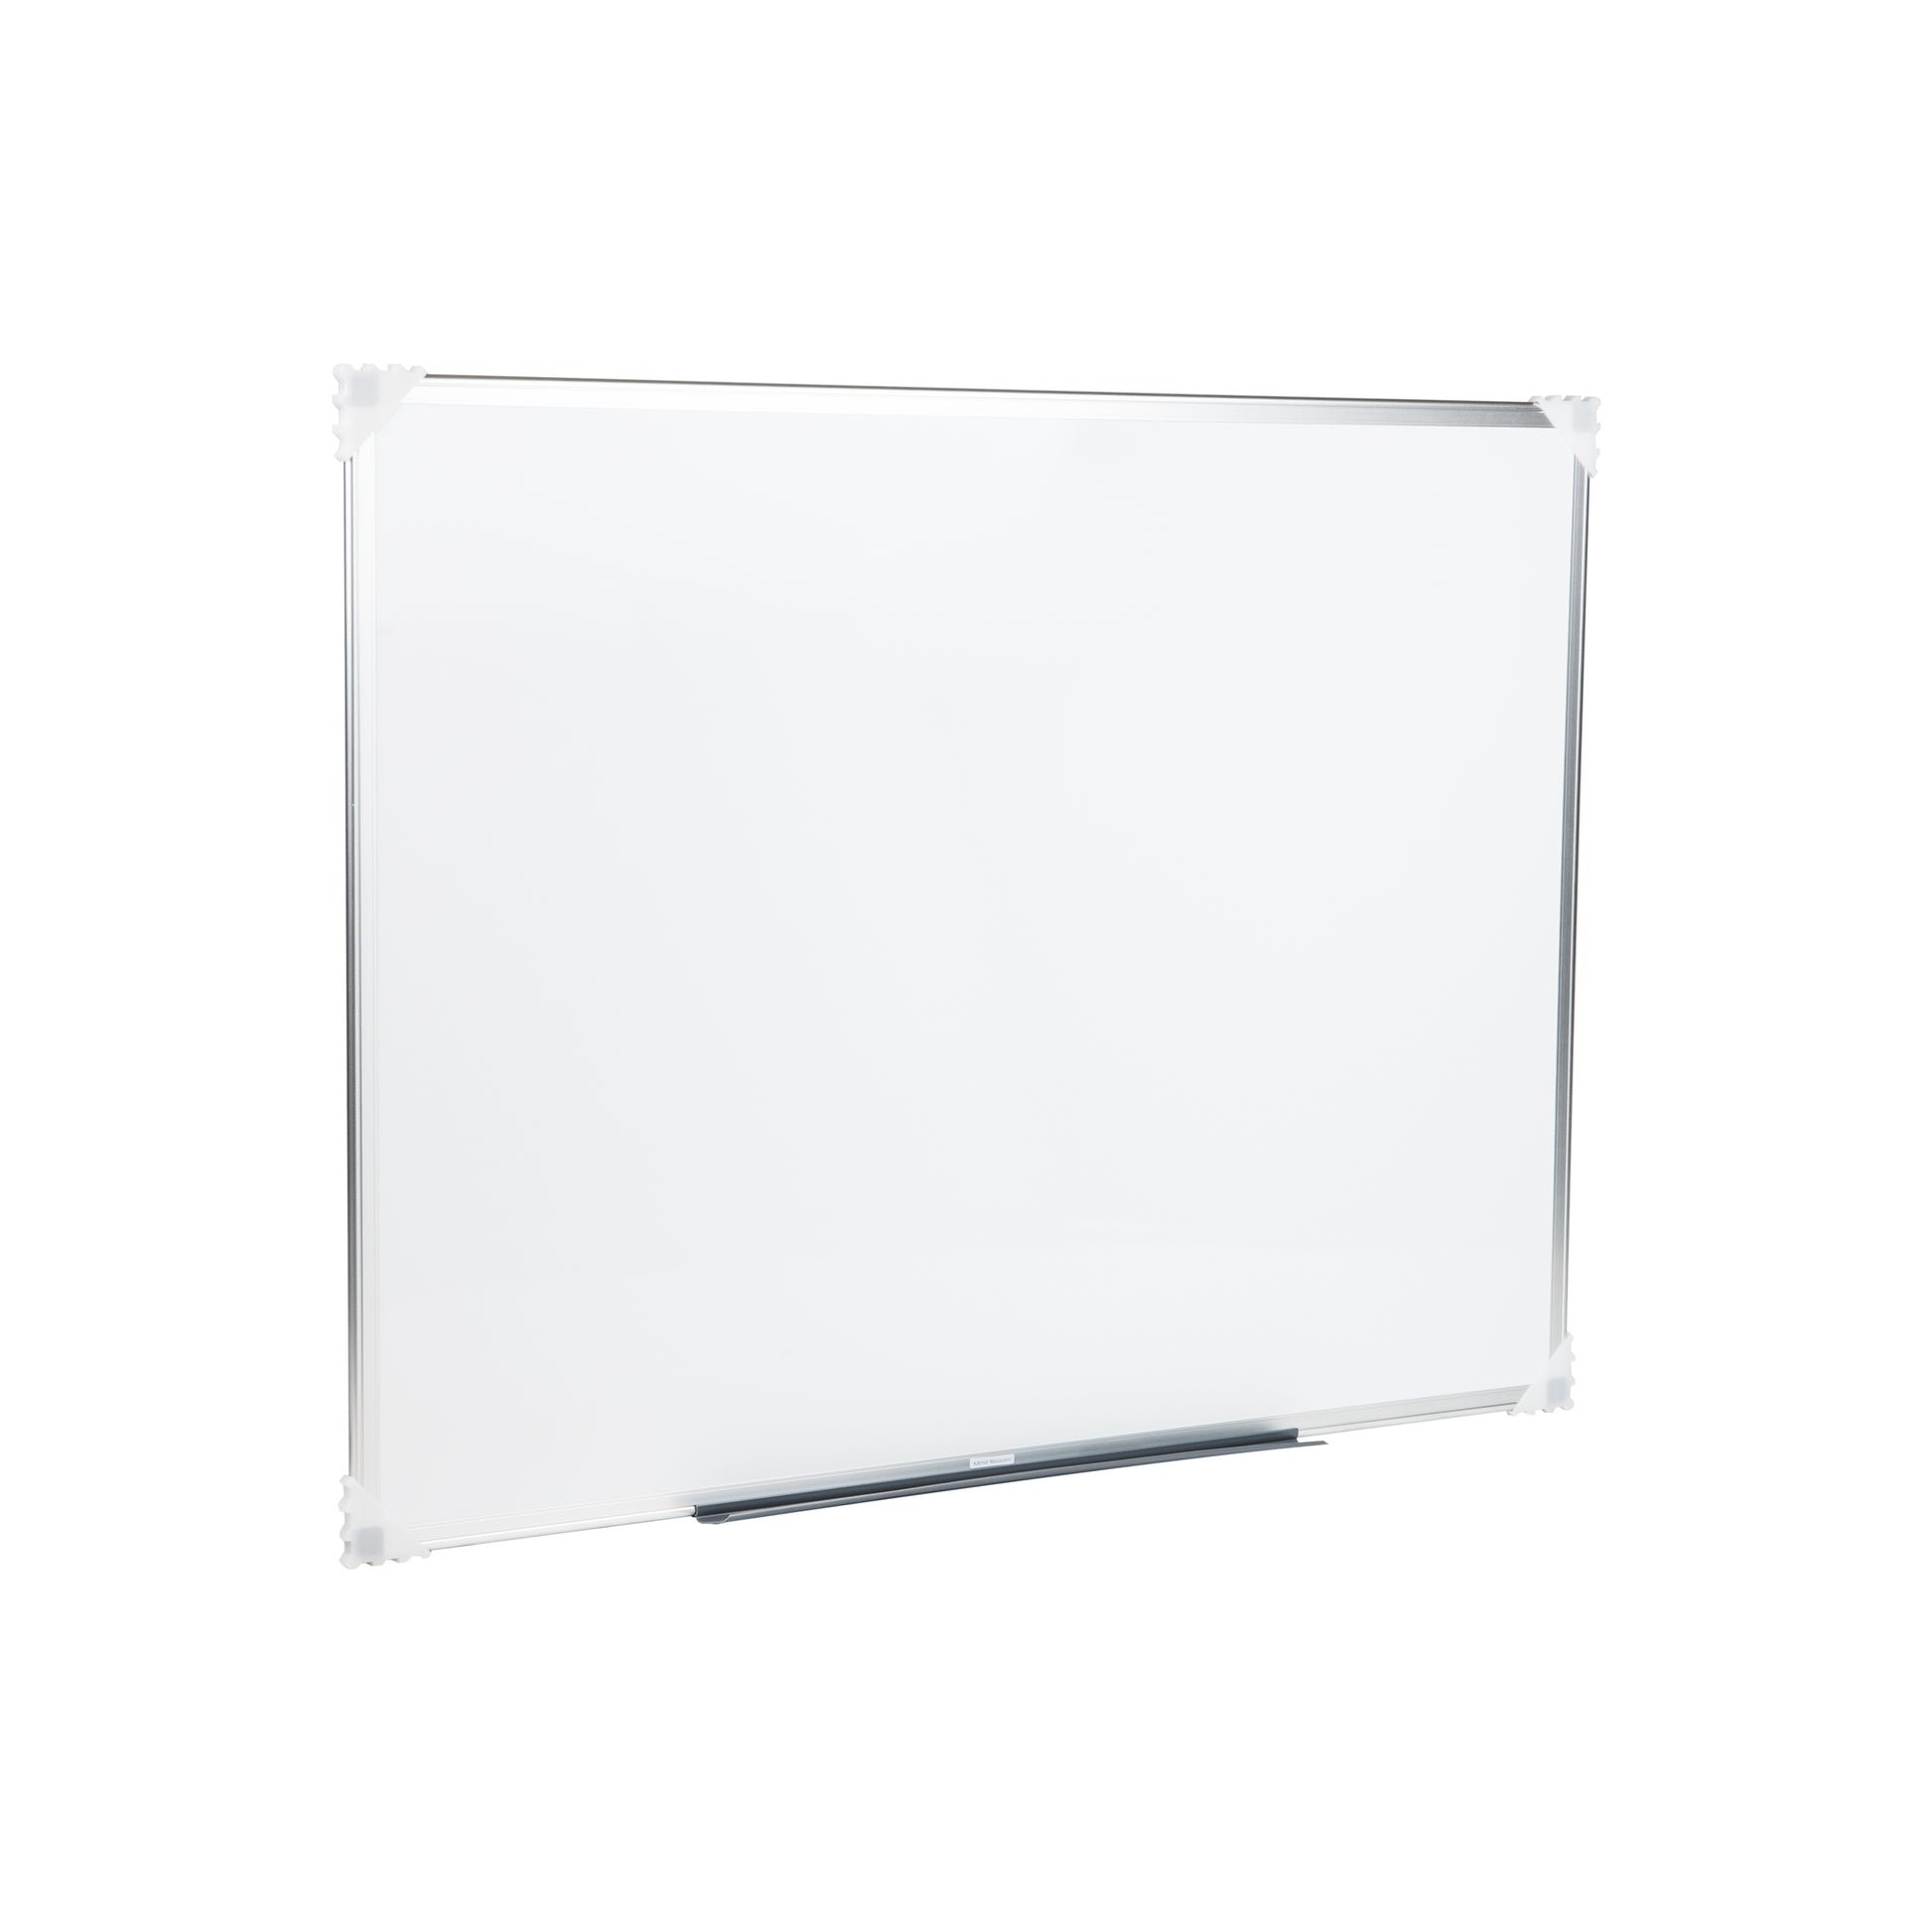 Whiteboard Stands and Whiteboards - Set of 6 by Really Good Stuff